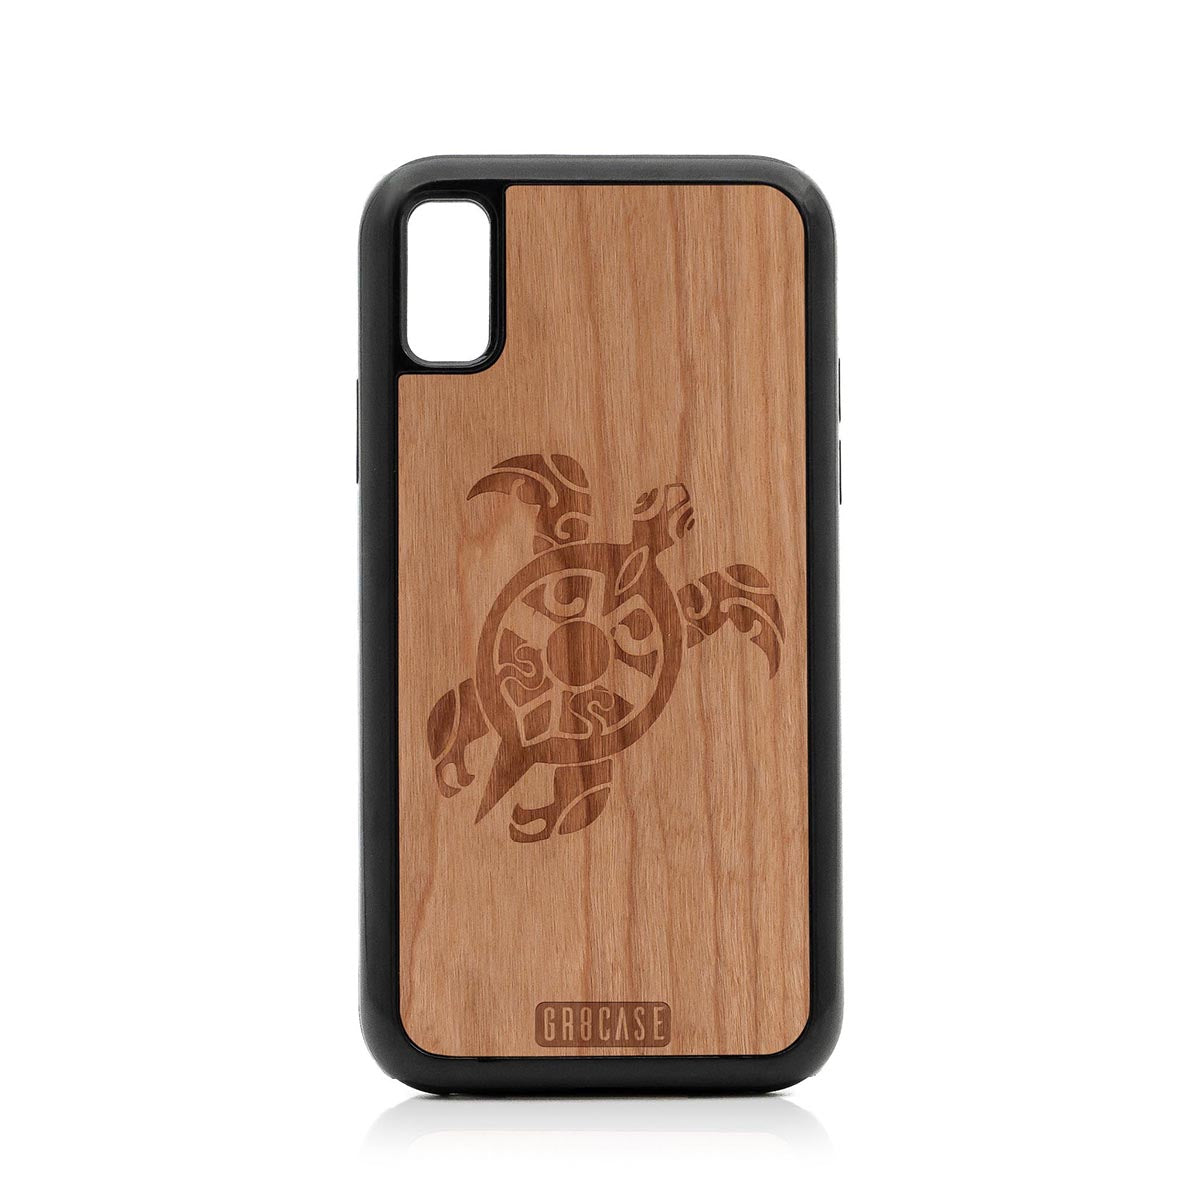 Turtle Design Wood Case For iPhone X/XS